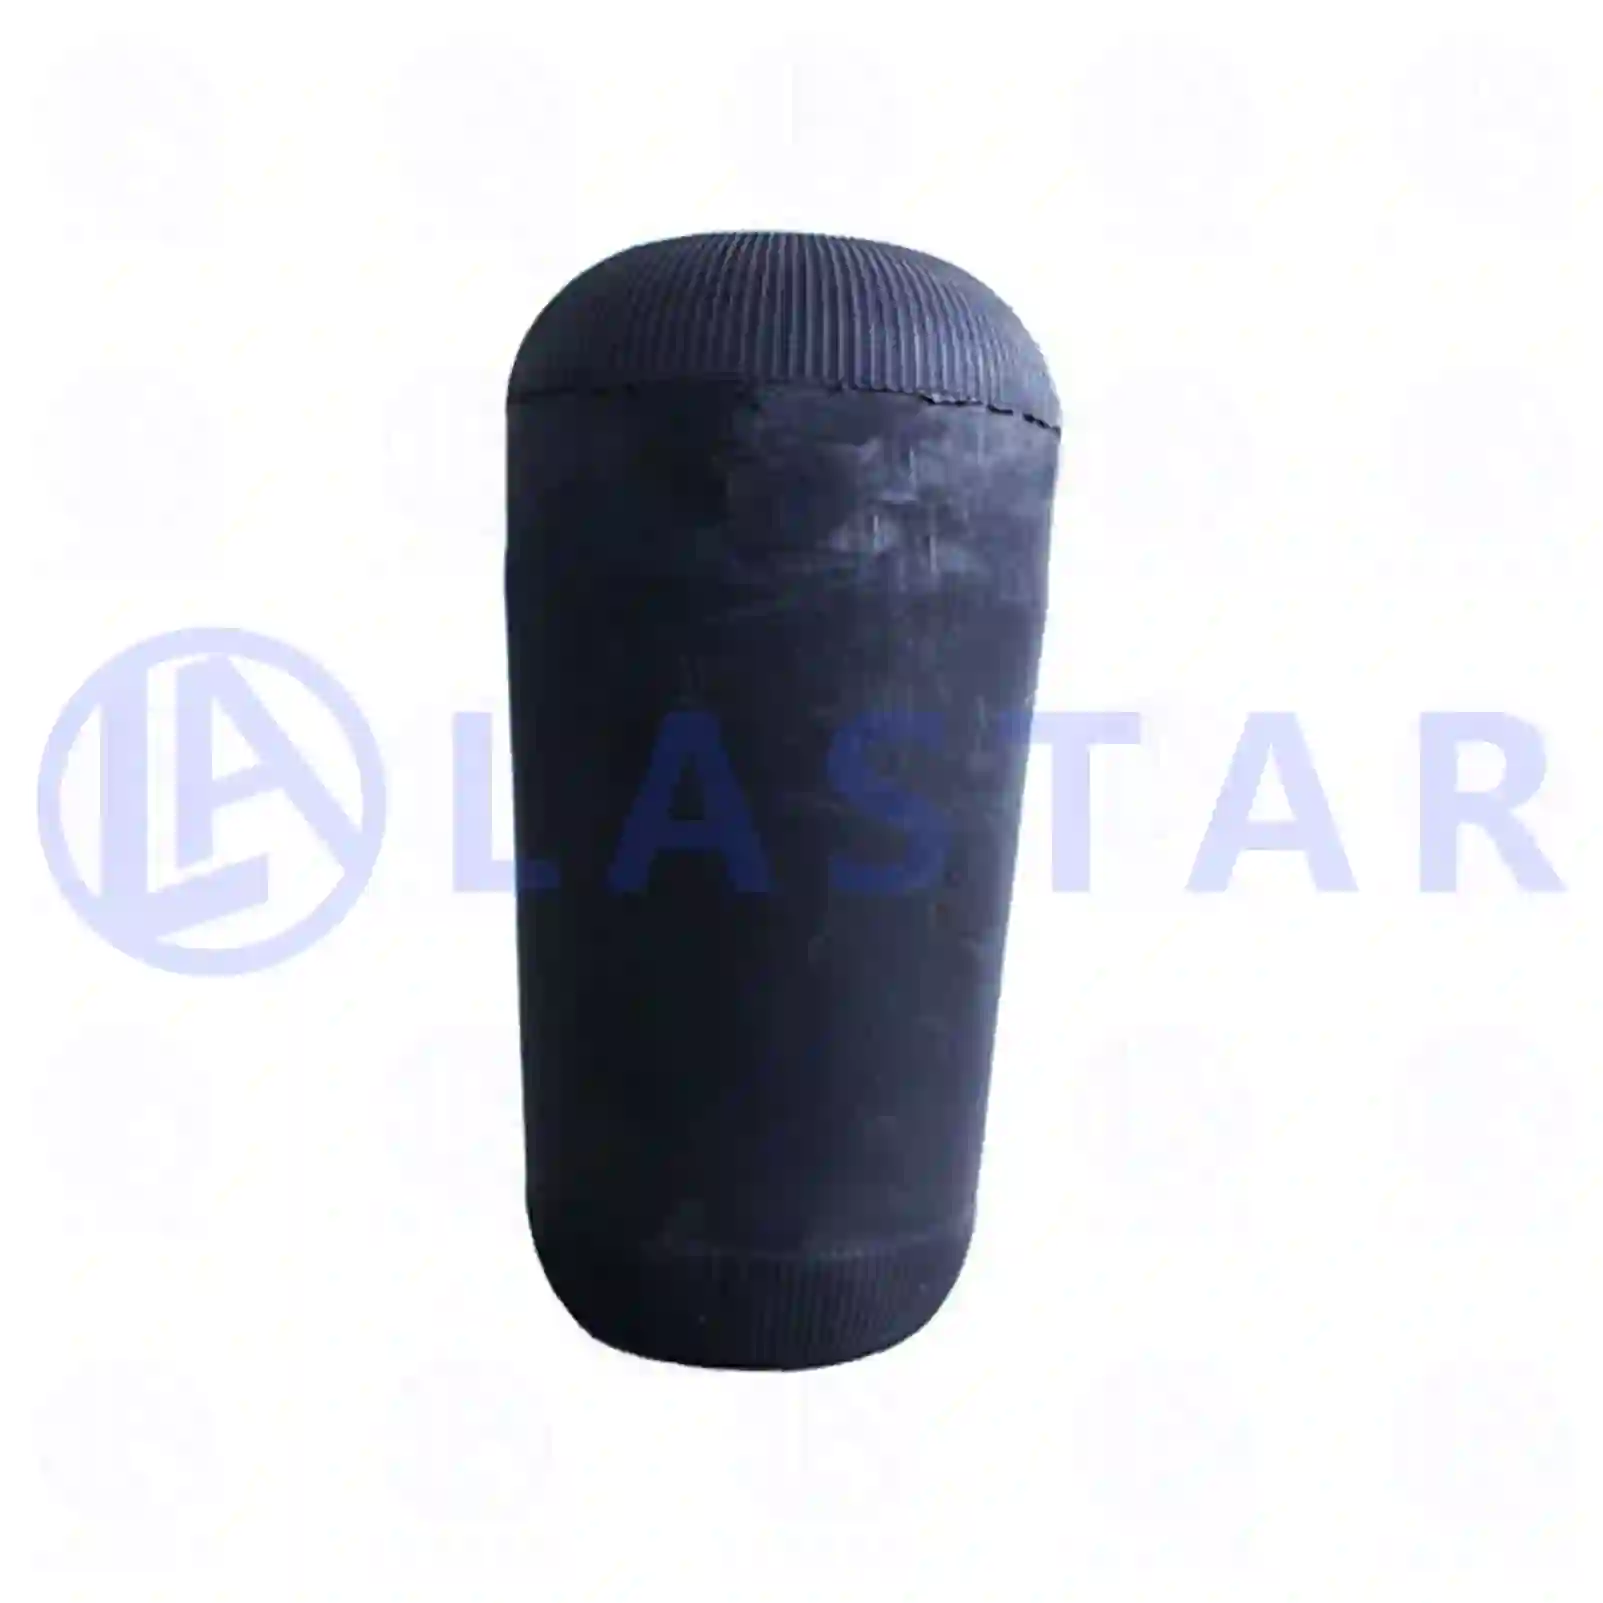 Air spring, without piston, 77729017, 98478799, 81436010069, 81436010104, 81436010108, 81436010109, 81436010111, 81436010120, 81436010122, 81436010123, 81436010124, 81436010130, 81436010131, 81436010133, 81436010134, 81436010140, 81436010141, 81436010142, 81436010146, 81436010147, 81436010150, 81436010164, 6523270101, 6583280001, 5000301452, MLF7012, MLF7084, ZG40822-0008 ||  77729017 Lastar Spare Part | Truck Spare Parts, Auotomotive Spare Parts Air spring, without piston, 77729017, 98478799, 81436010069, 81436010104, 81436010108, 81436010109, 81436010111, 81436010120, 81436010122, 81436010123, 81436010124, 81436010130, 81436010131, 81436010133, 81436010134, 81436010140, 81436010141, 81436010142, 81436010146, 81436010147, 81436010150, 81436010164, 6523270101, 6583280001, 5000301452, MLF7012, MLF7084, ZG40822-0008 ||  77729017 Lastar Spare Part | Truck Spare Parts, Auotomotive Spare Parts